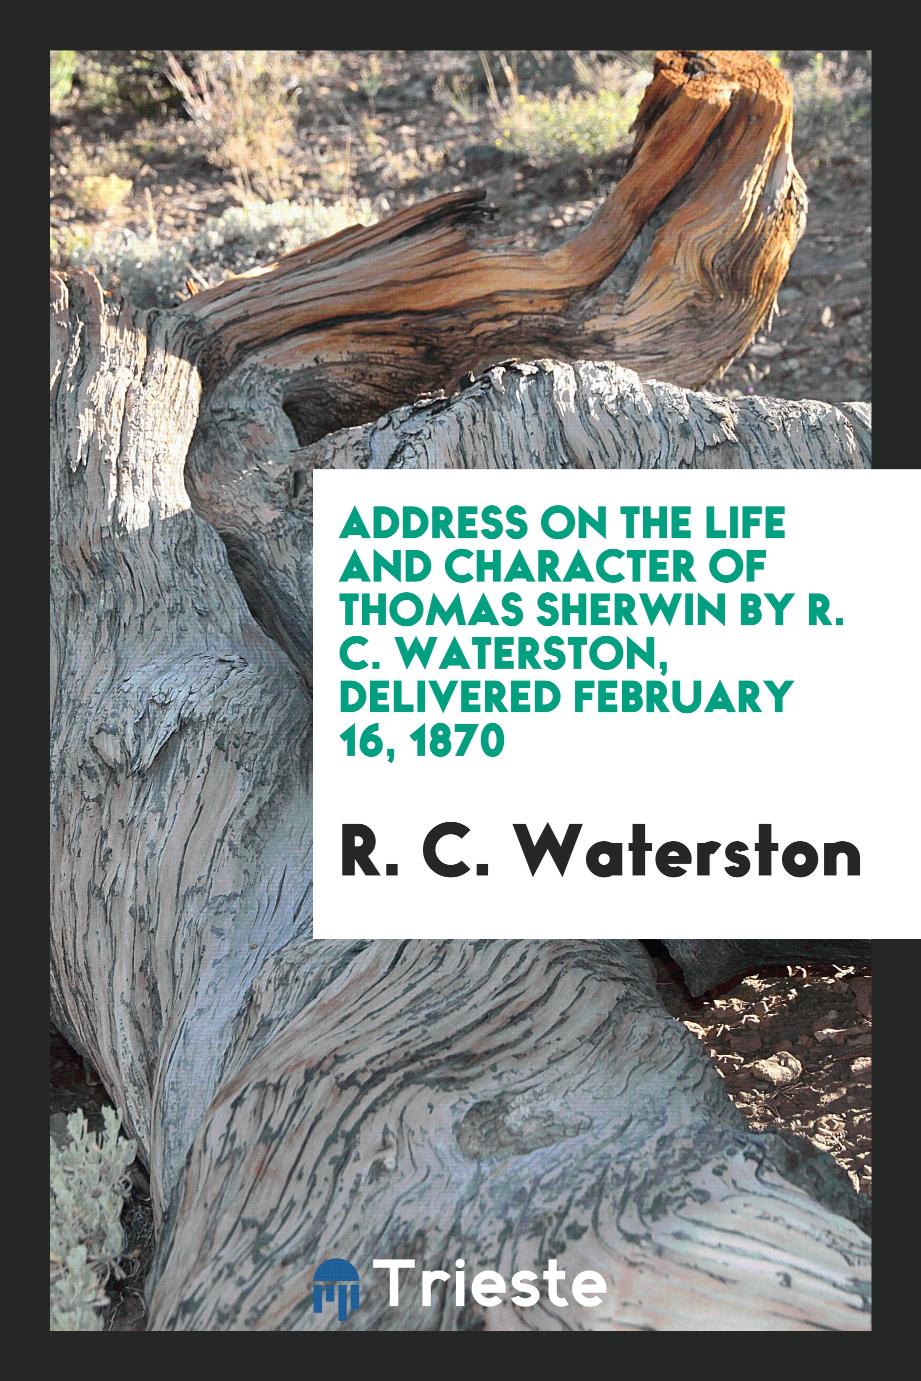 Address on the Life and Character of Thomas Sherwin by R. C. Waterston, Delivered February 16, 1870